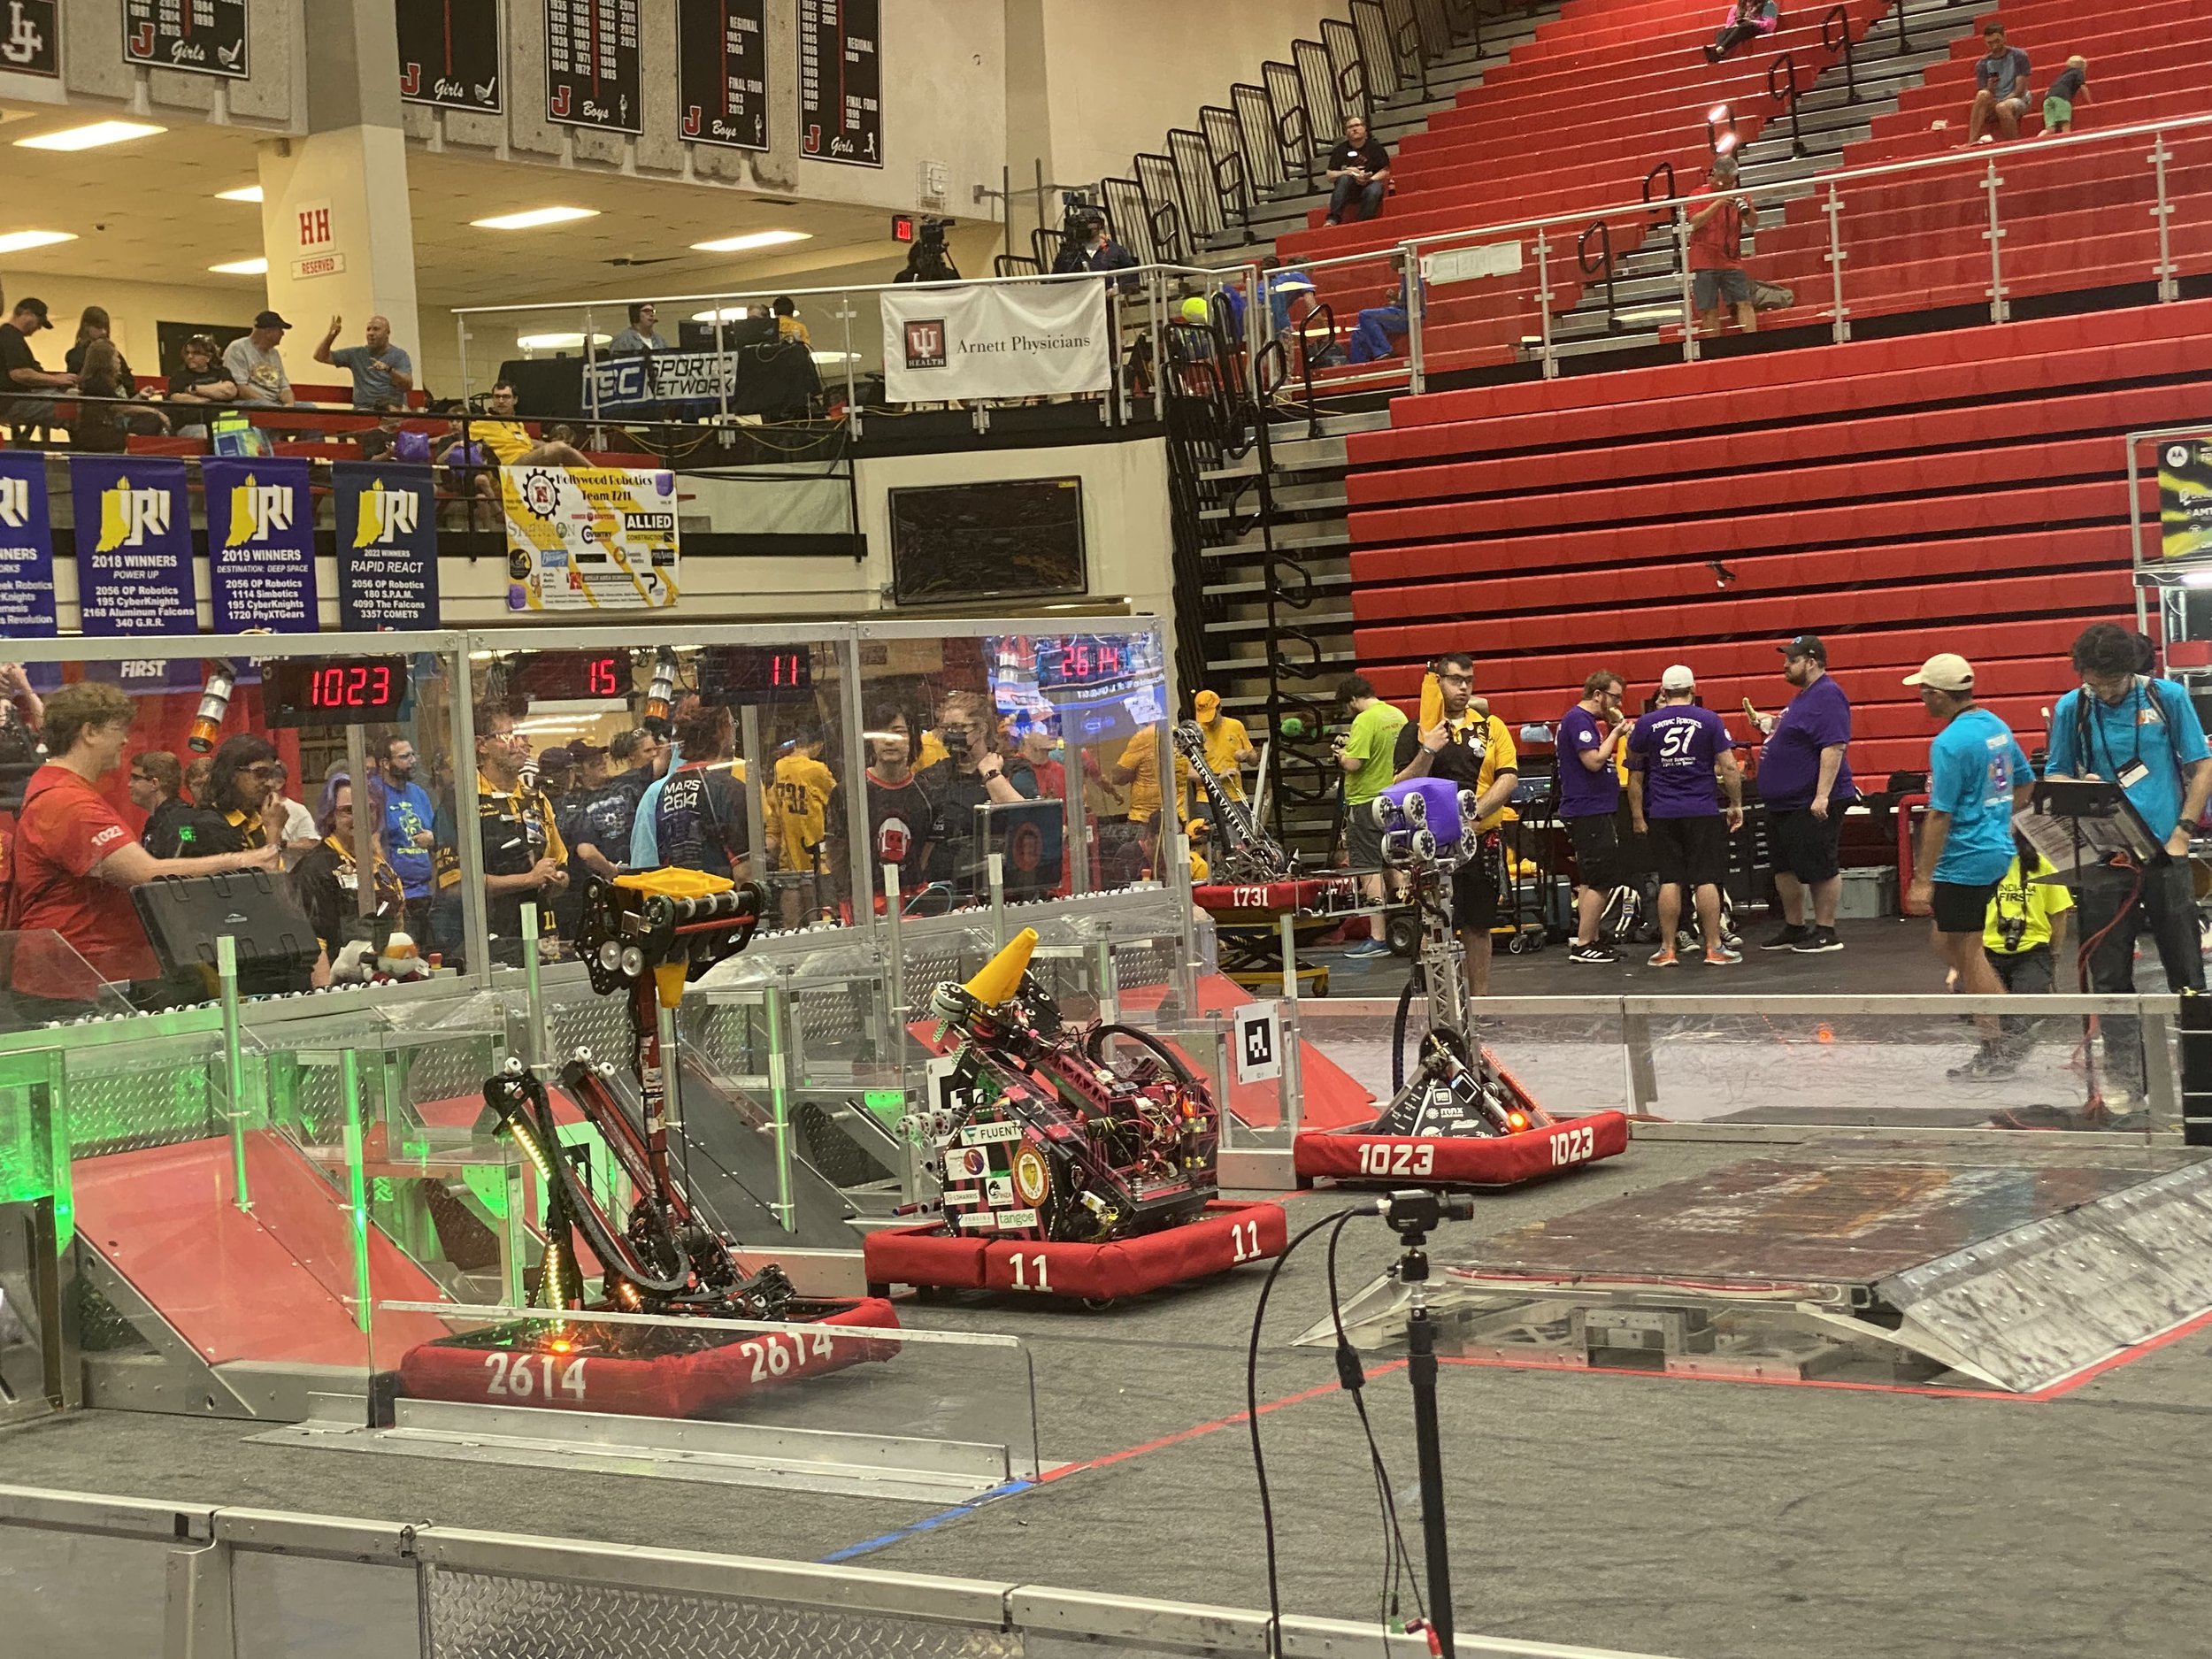  1023’s drive team and robot all set up and ready to go right before their match! 